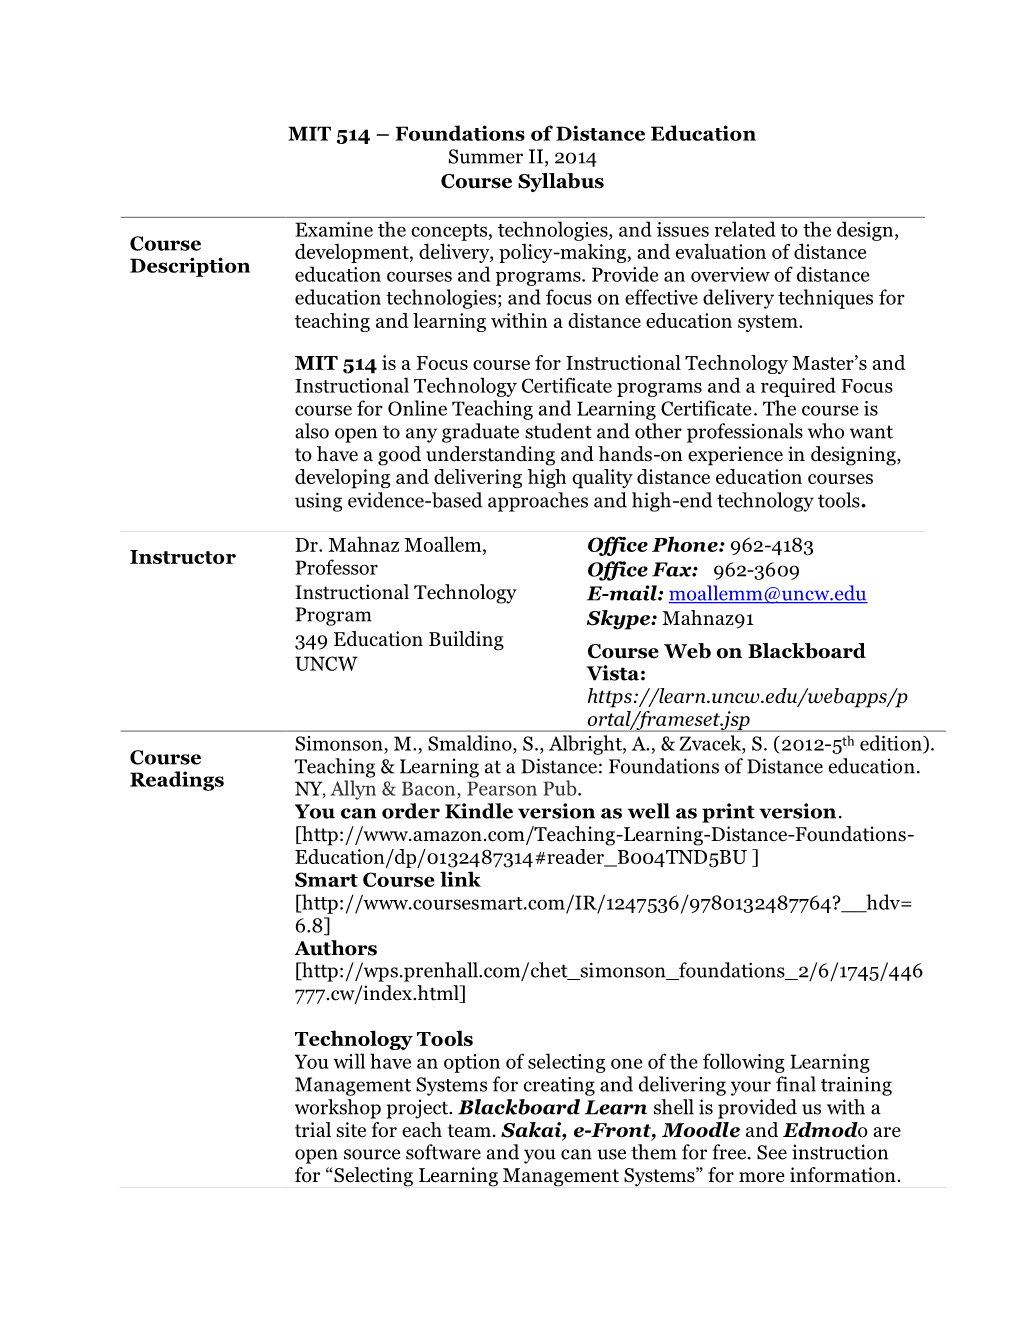 MIT 514 – Foundations of Distance Education Summer II, 2014 Course Syllabus